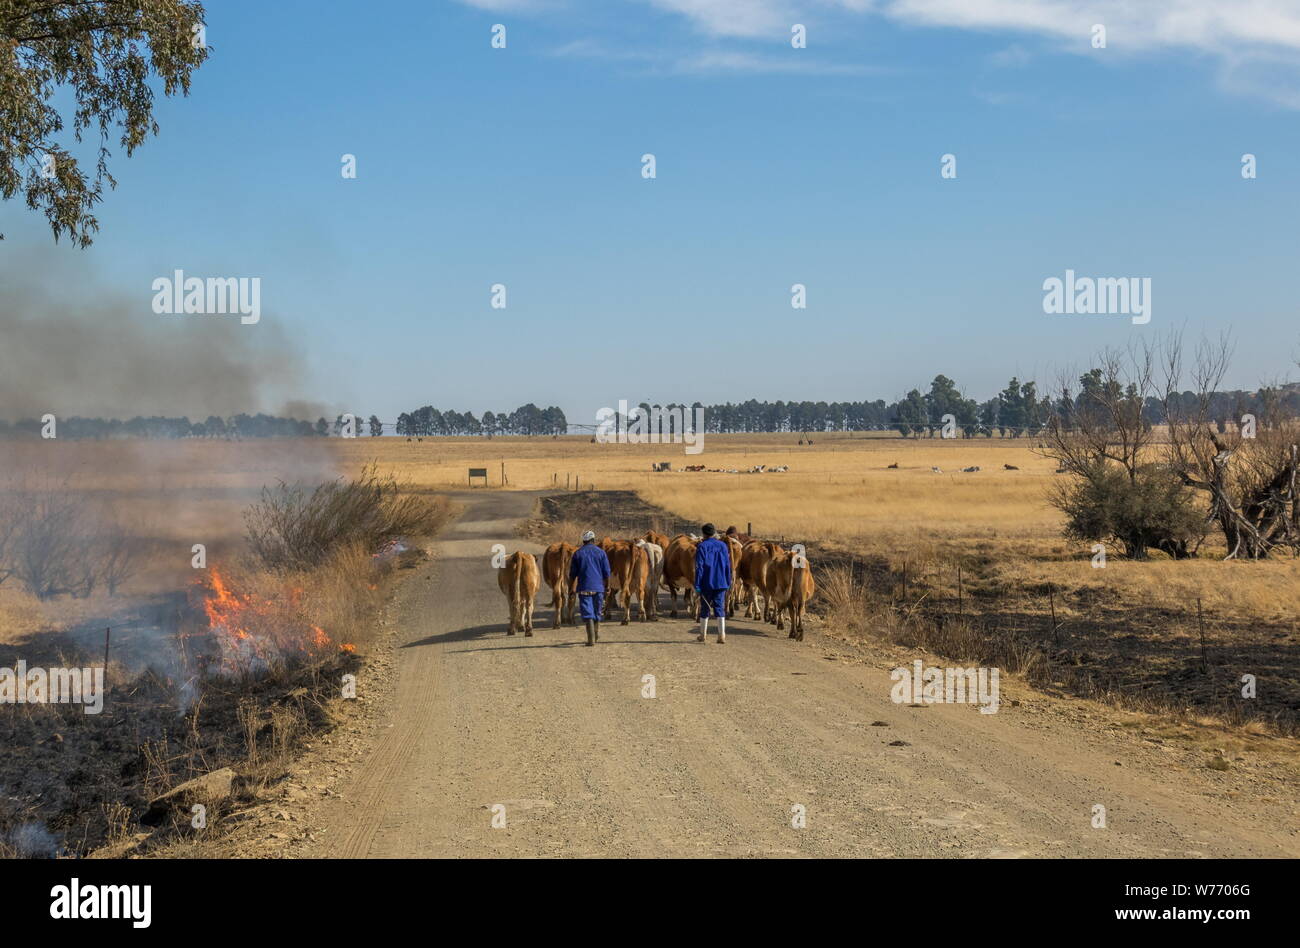 Bergville, South Africa - unidentified farm workers drive a small herd of cattle along a dirt road where firebreaks are burning in the winter grass Stock Photo